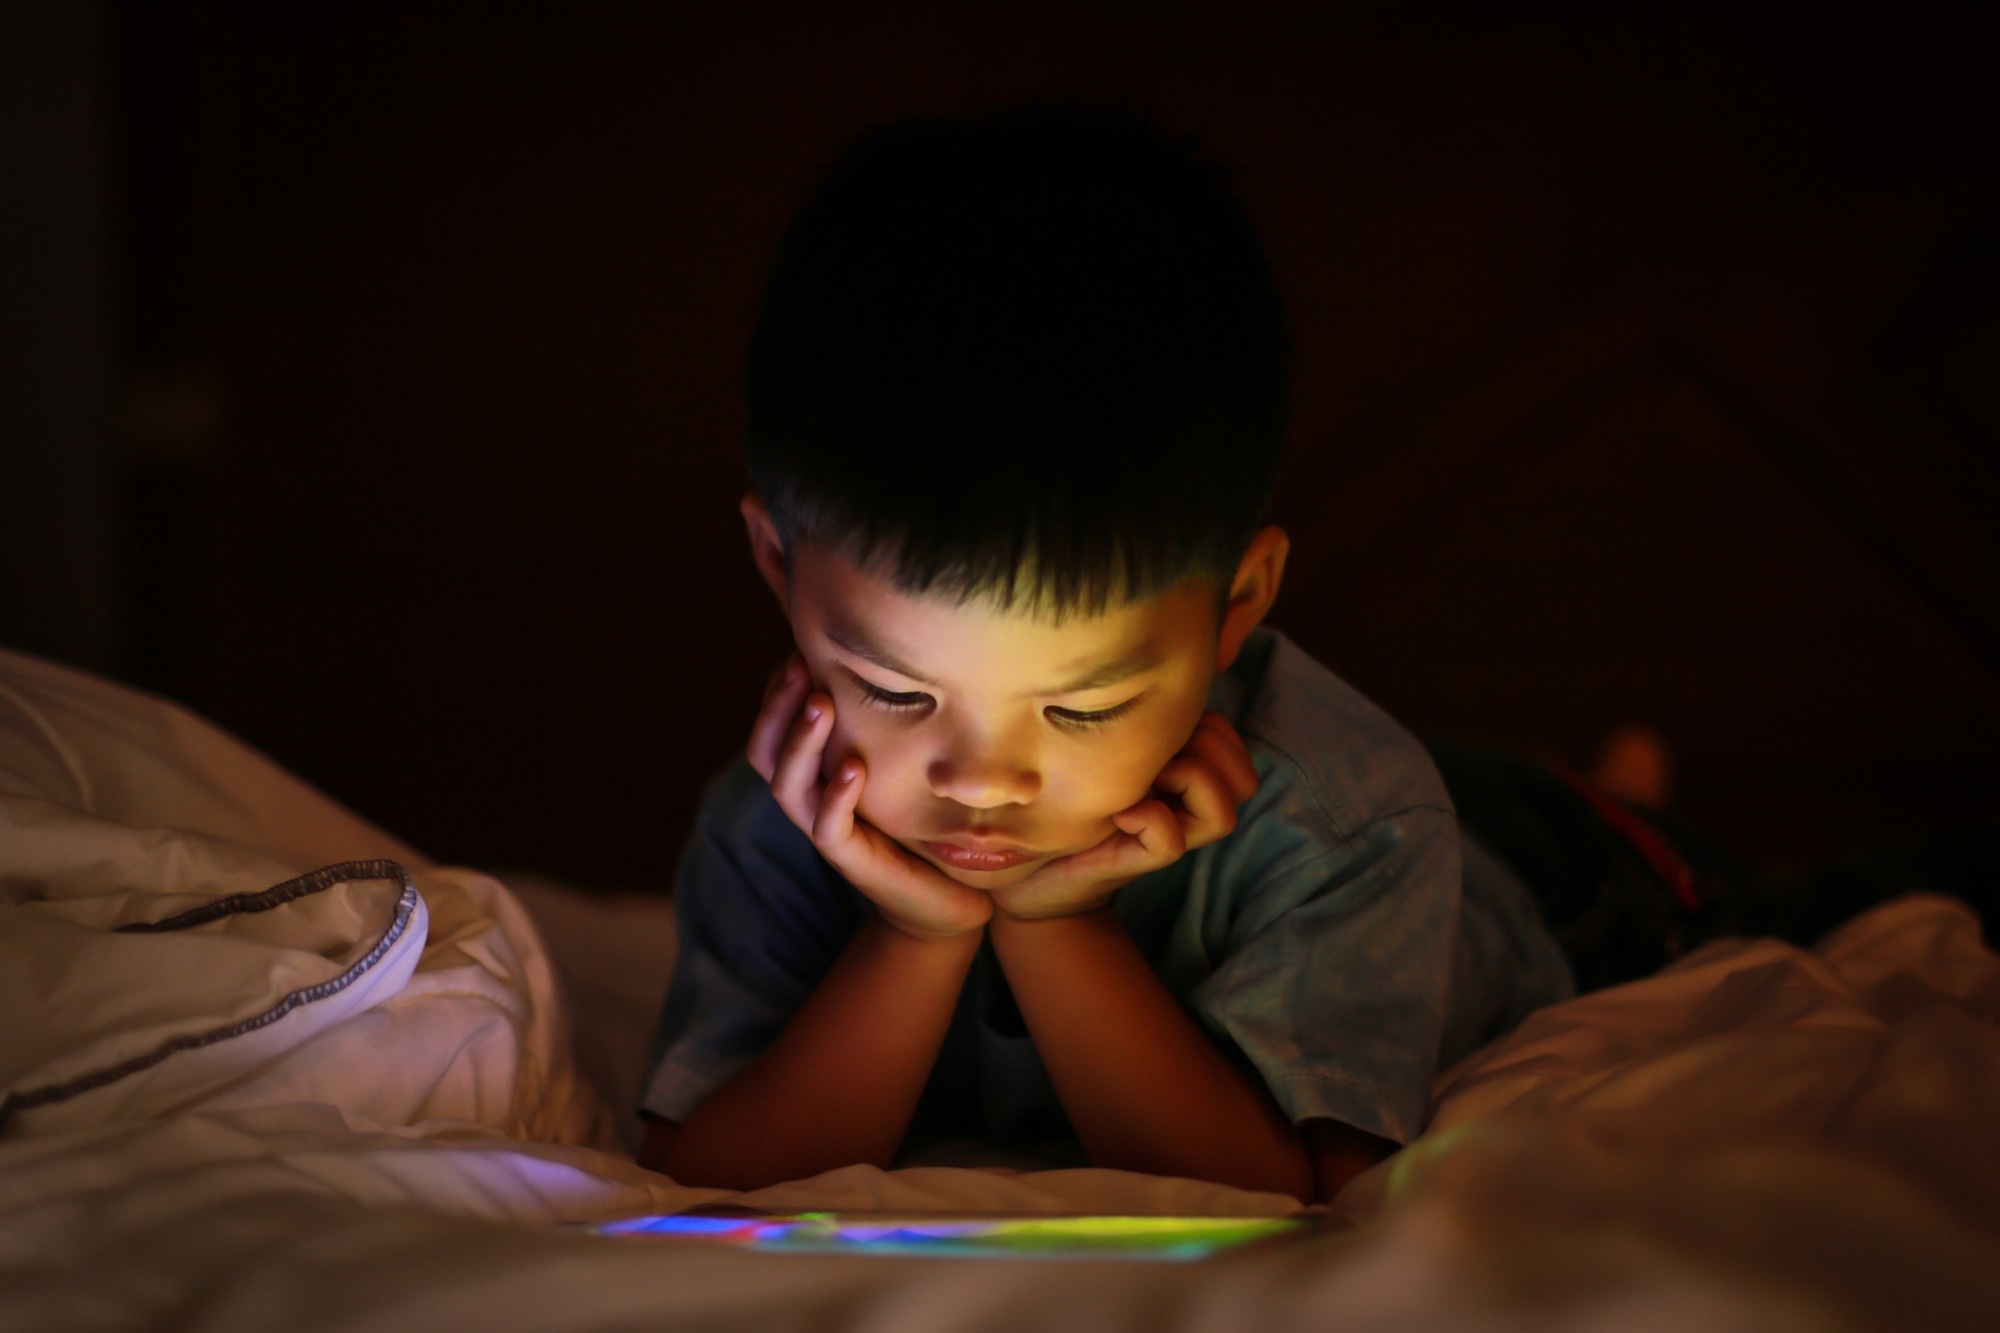 Study: Associations between screen viewing at 2 and 3.5 years and drawing ability at 3.5 years among children from the French nationwide Elfe birth cohort. Image Credit: vinnstock / Shutterstock